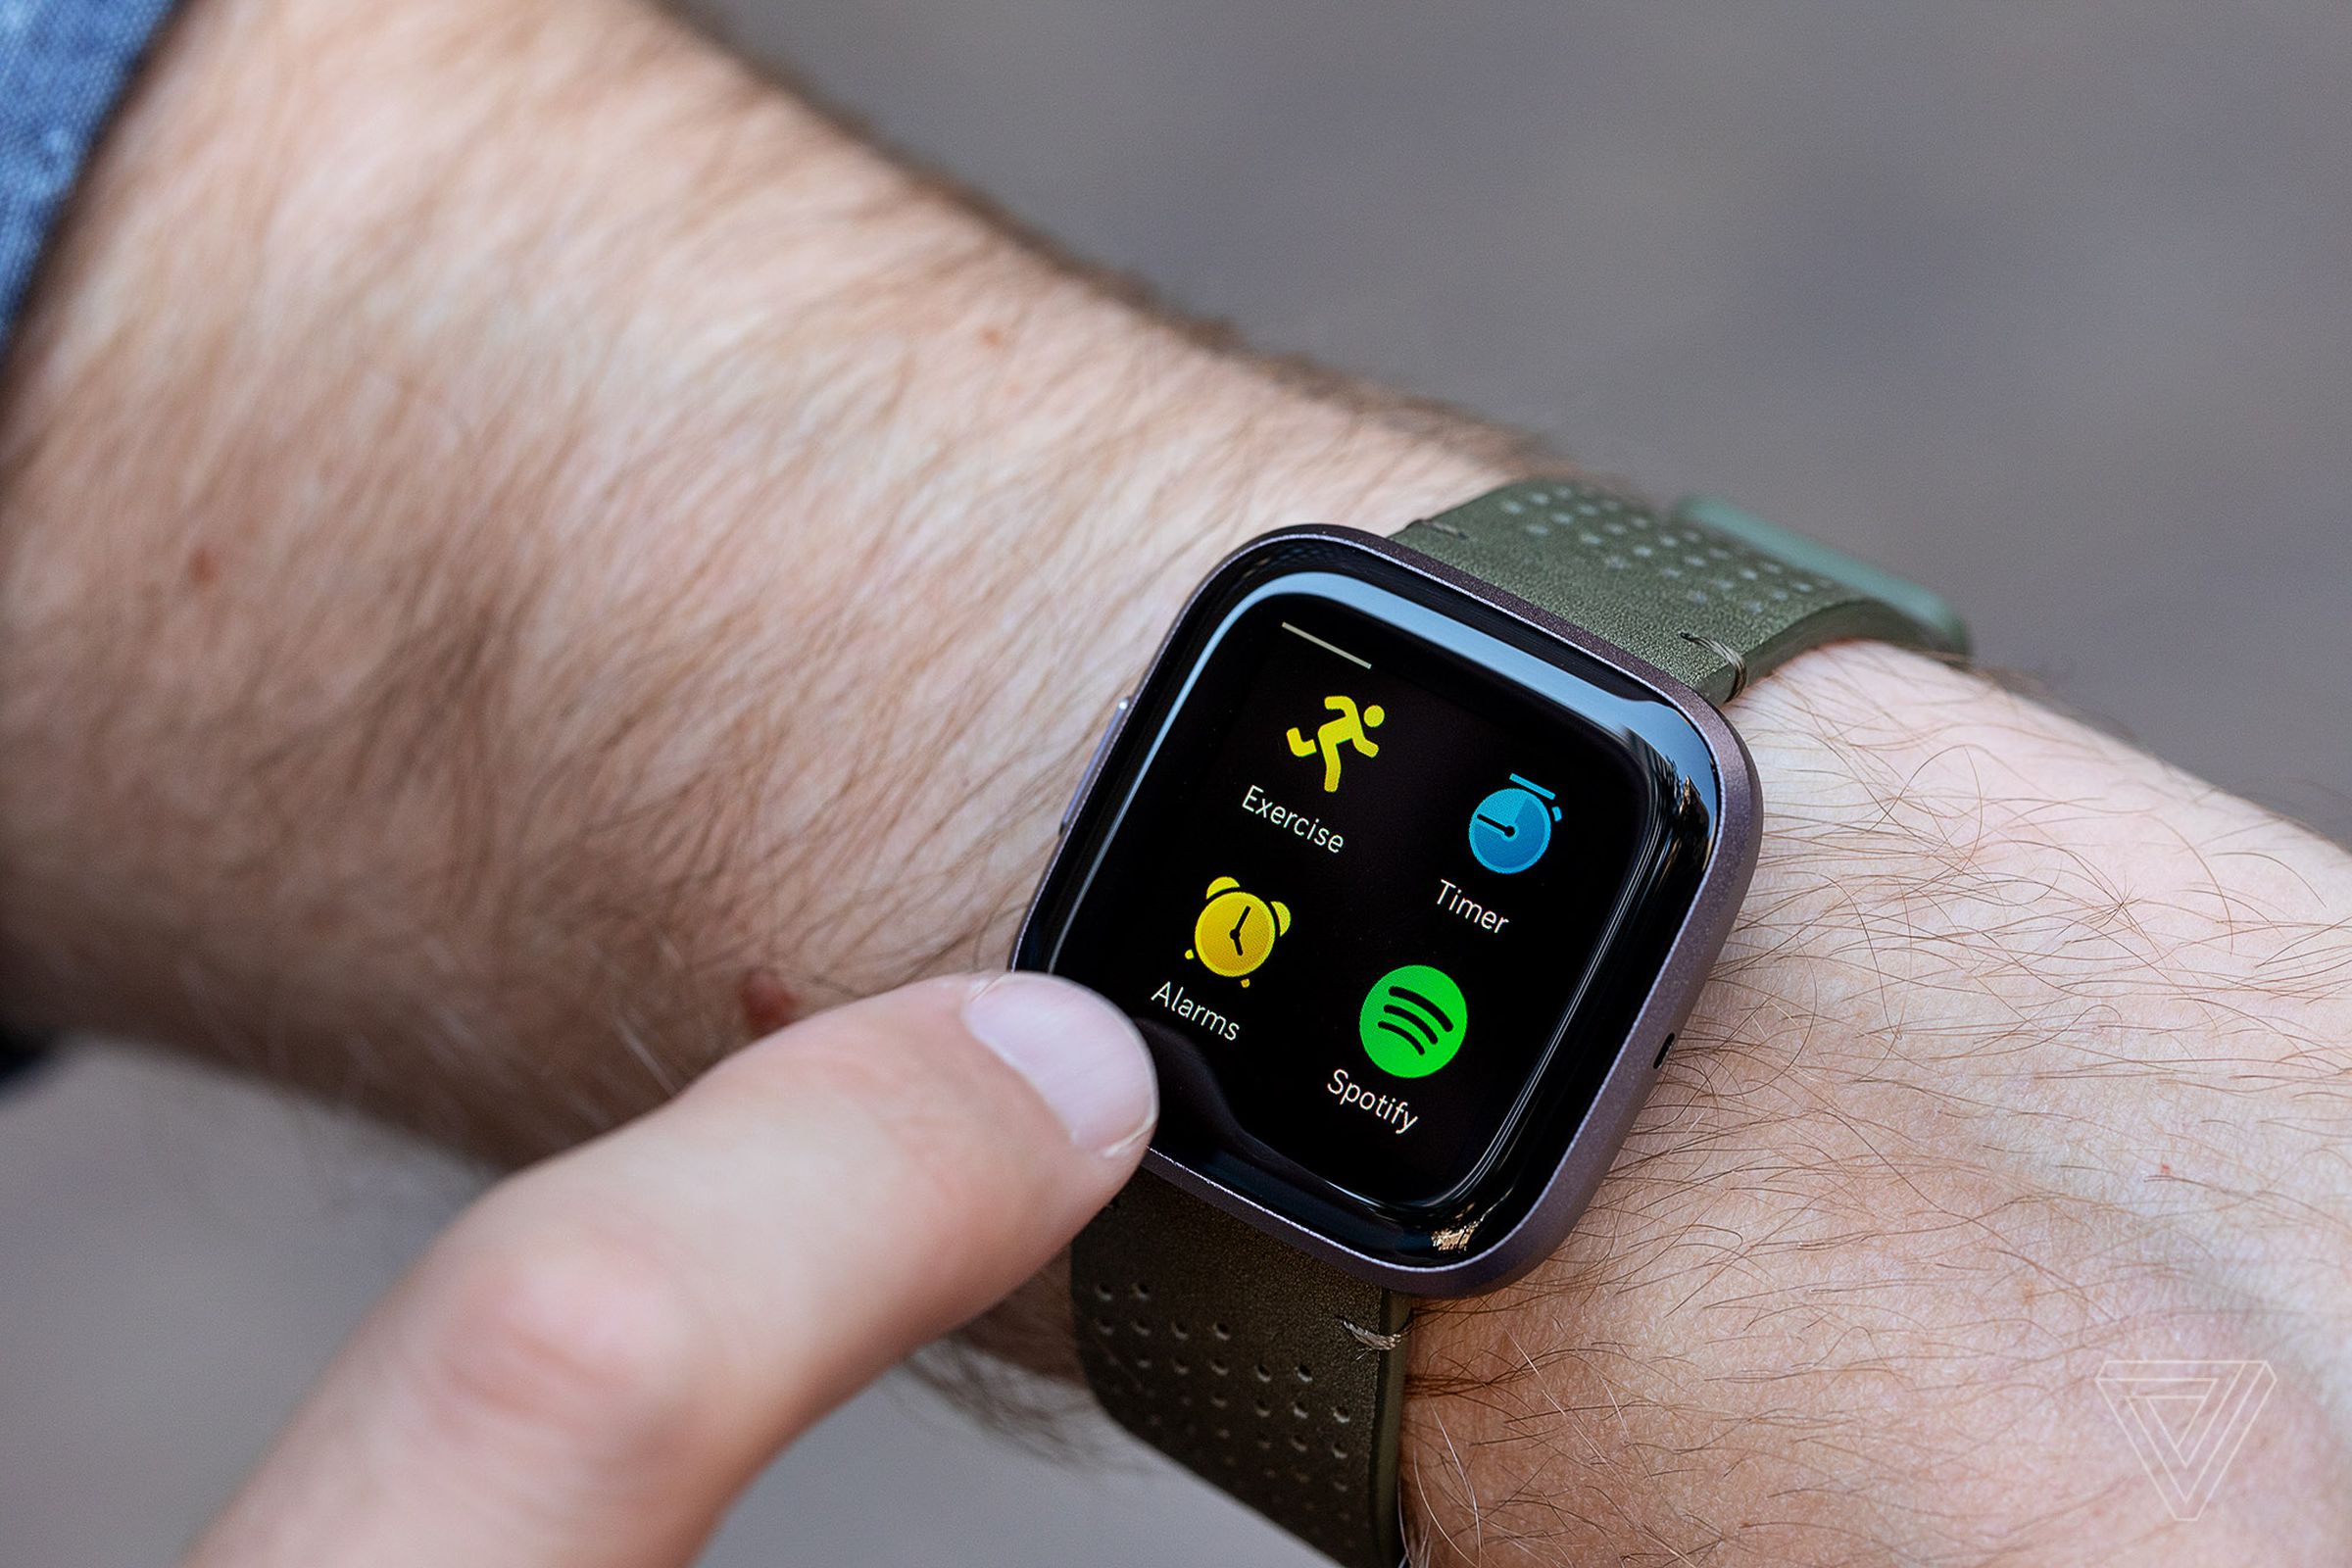 Spotify, Deezer, and Pandora are some of the major music services on Fitbit smartwatches.